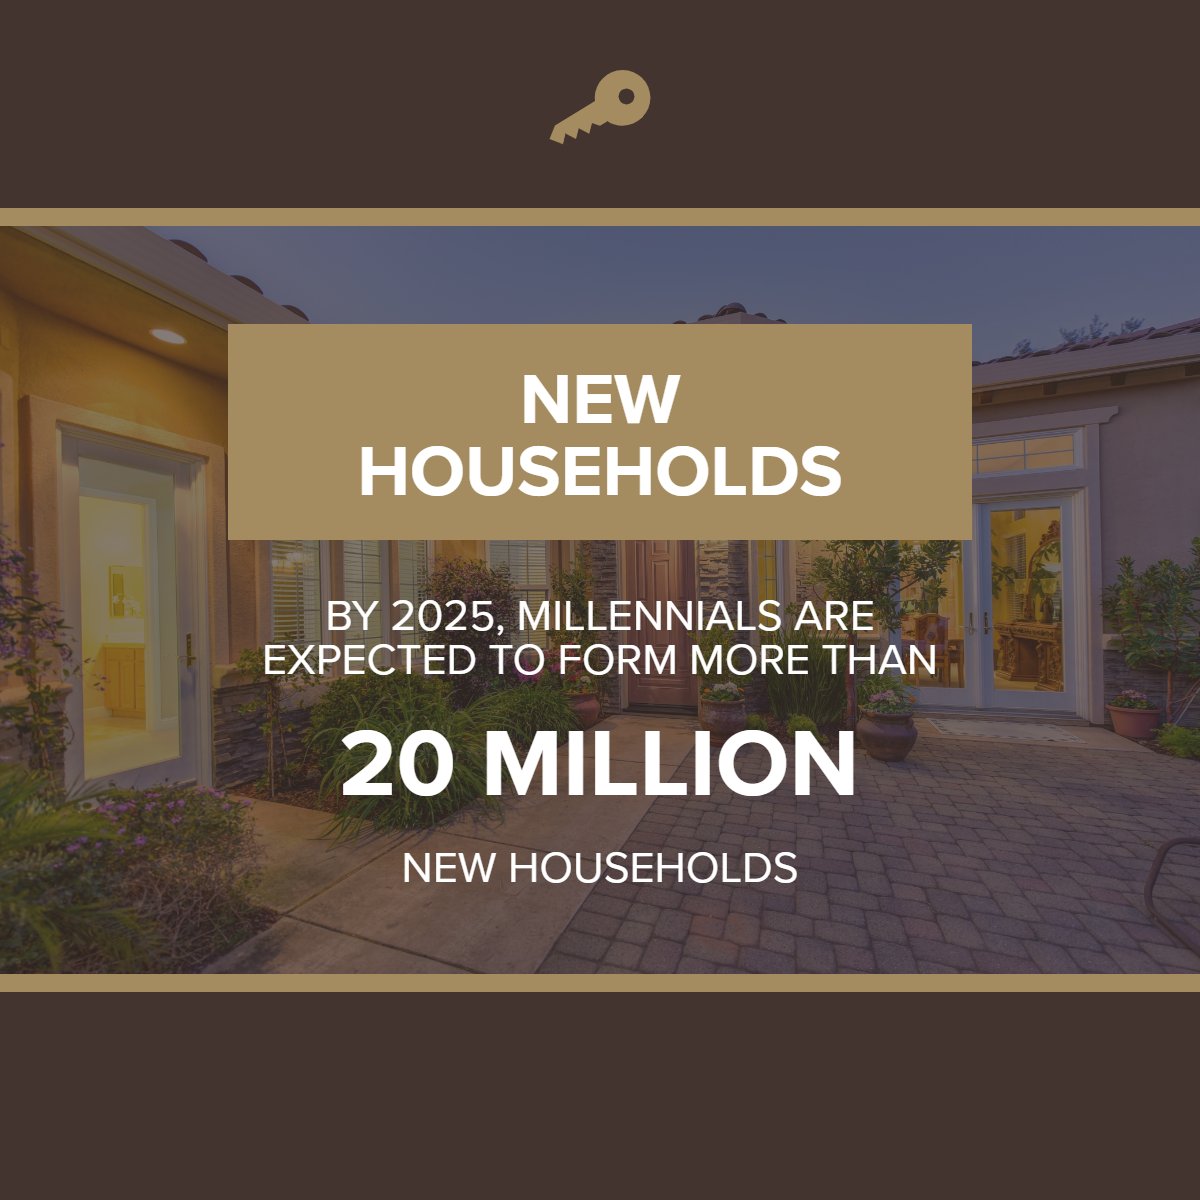 Did you know? 👀

By 2025, millennials are expected to form more than 20 MILLION new households. 

#millennial     #realestatemarket     #realestatestyle     #realestatefacts     #coolfacts
#realestate #realtor #southcarolina #homebuyer #land #homeowner